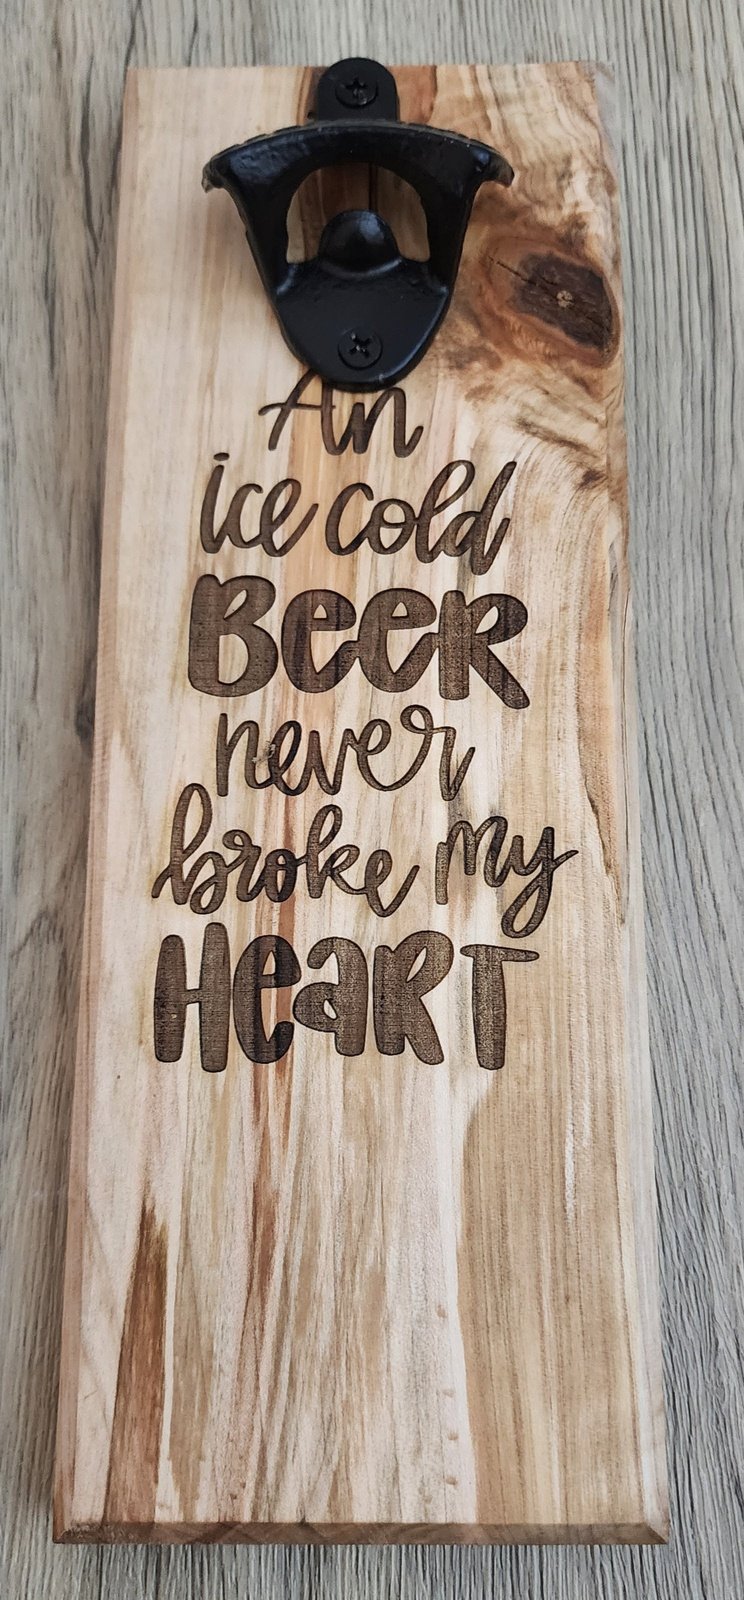 An ice cold beer" Wall Mounted Magnetic Bottle Opener